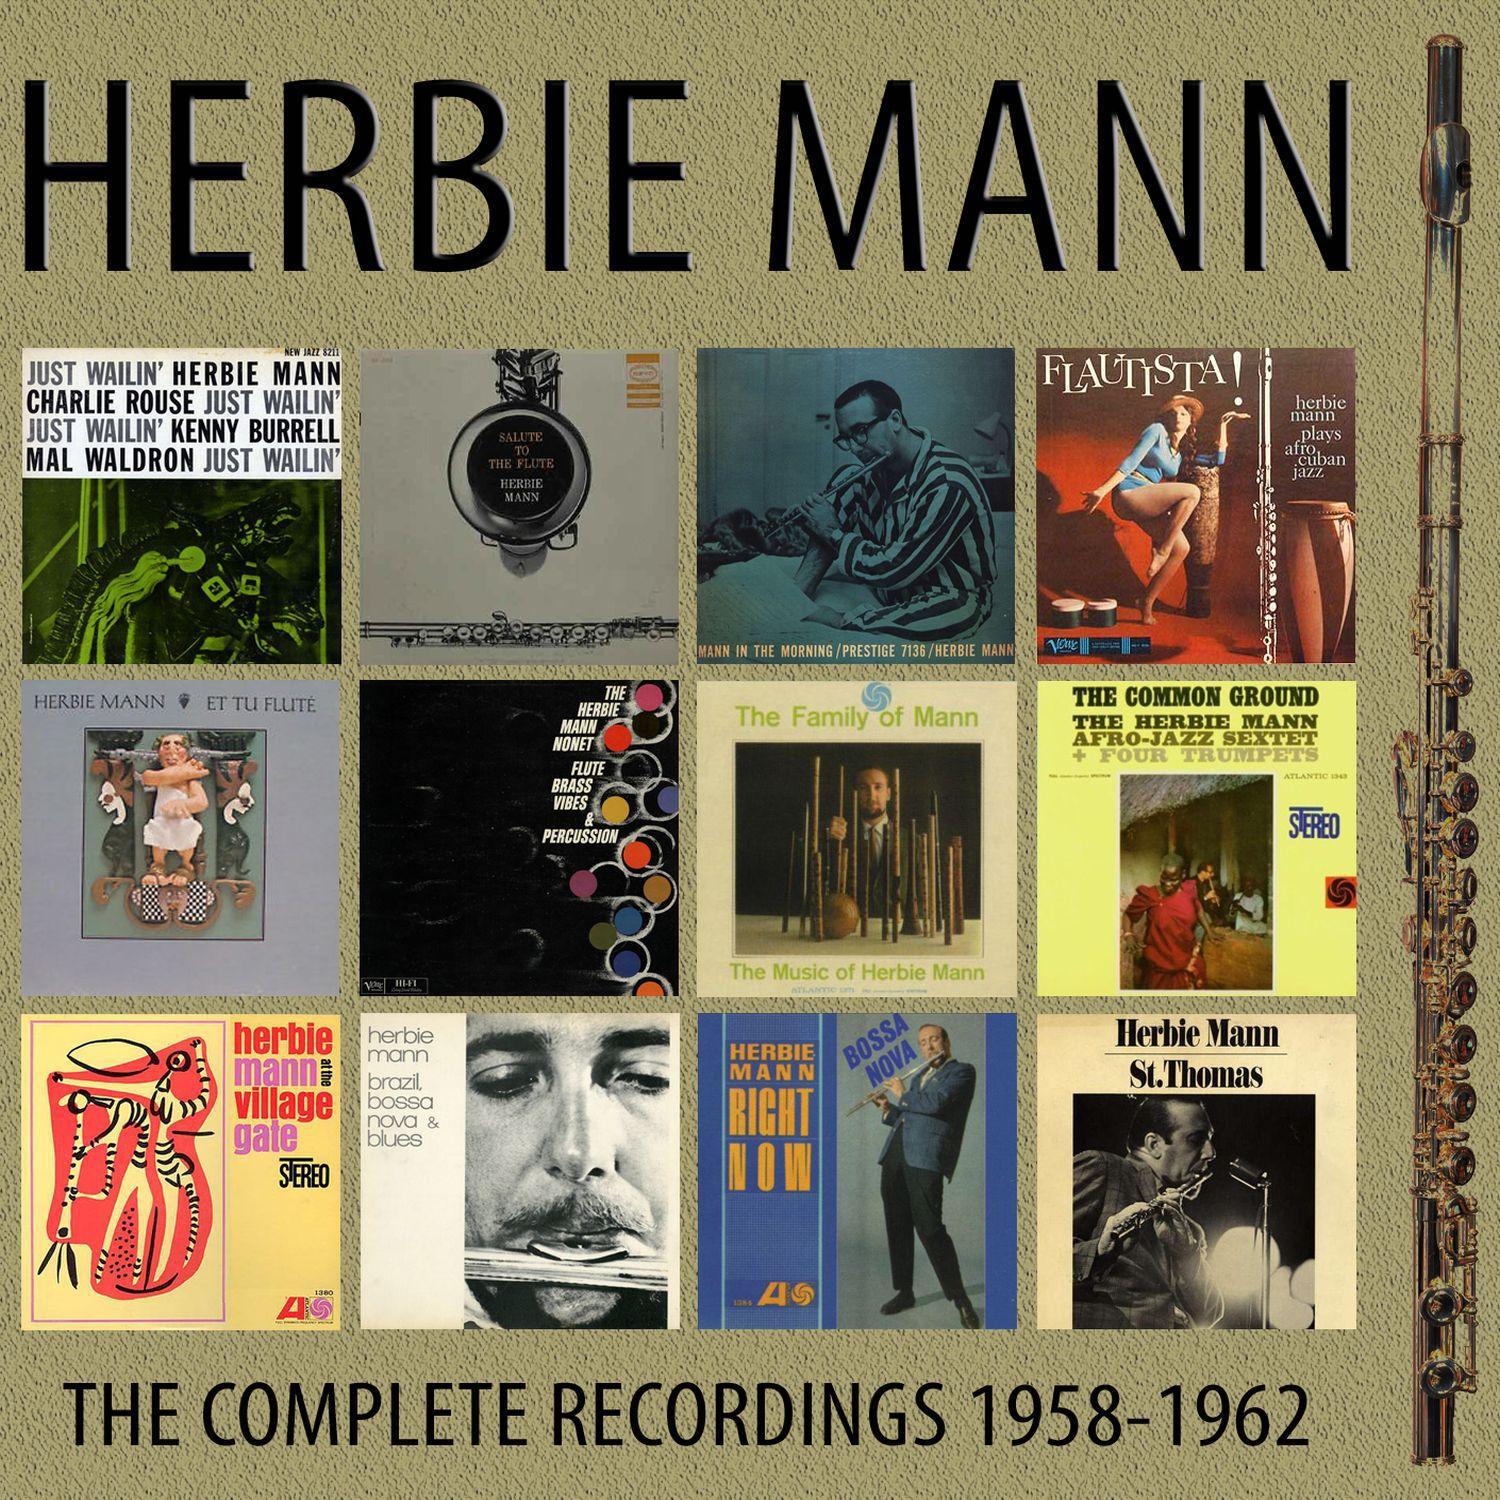 The Complete Recordings: 1958-1962